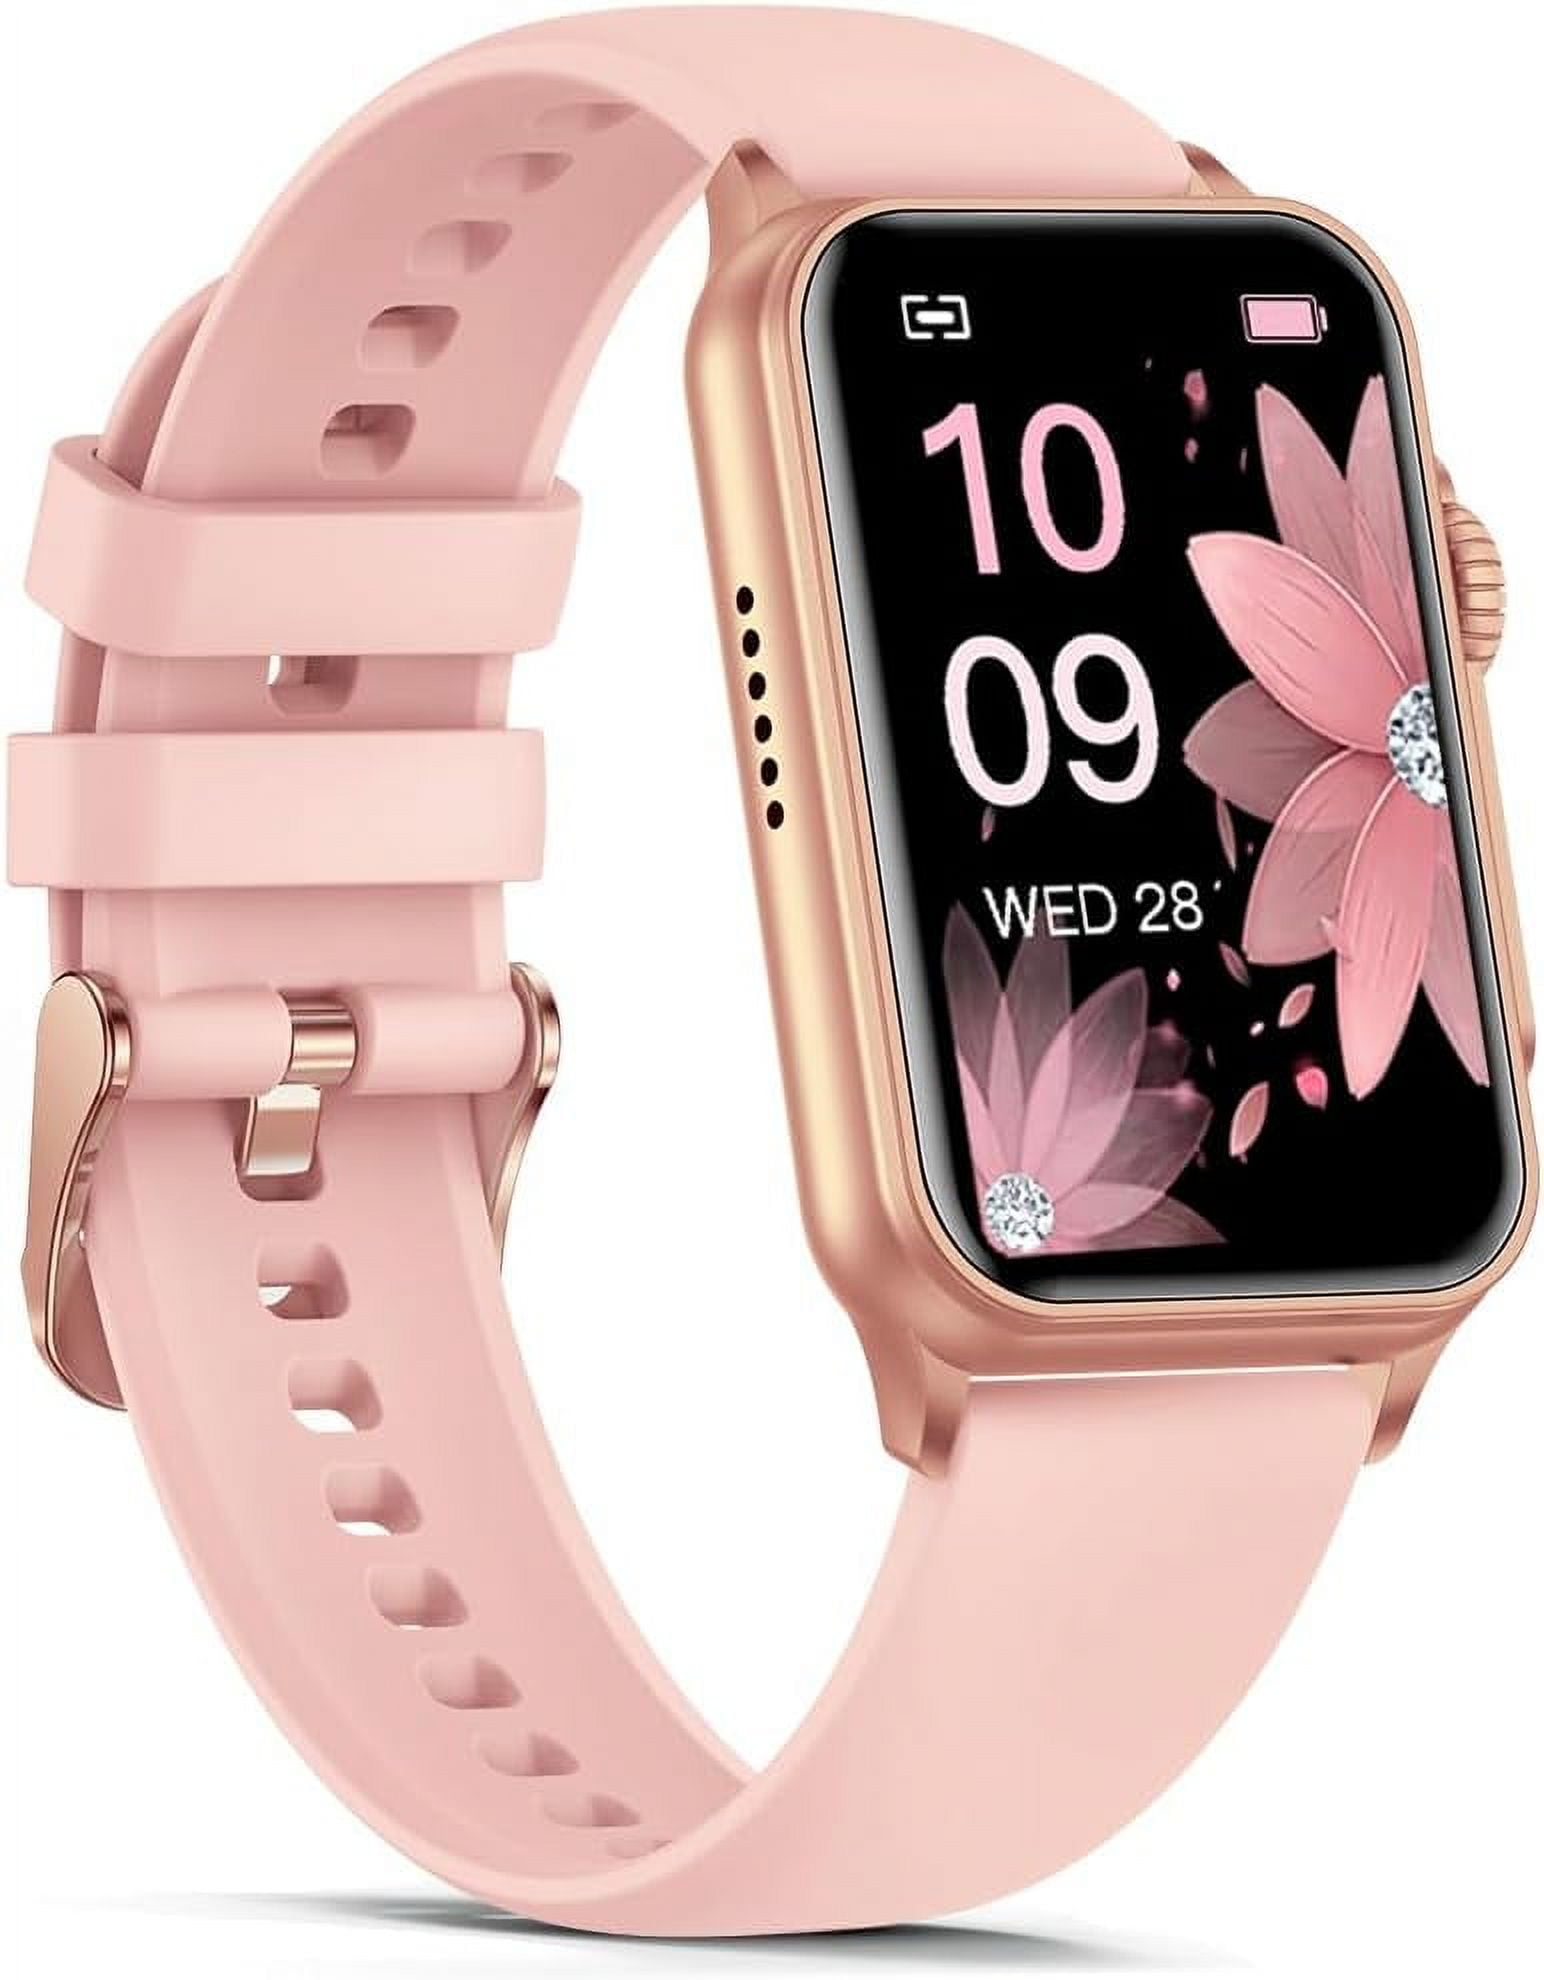 Smart Watch for Android and iPhone, Ifanze GTS5 IP68 Waterproof Smartwatch  for Women Men , Smart Watch with Bluetooth Call(Answer/Make Calls), Pink